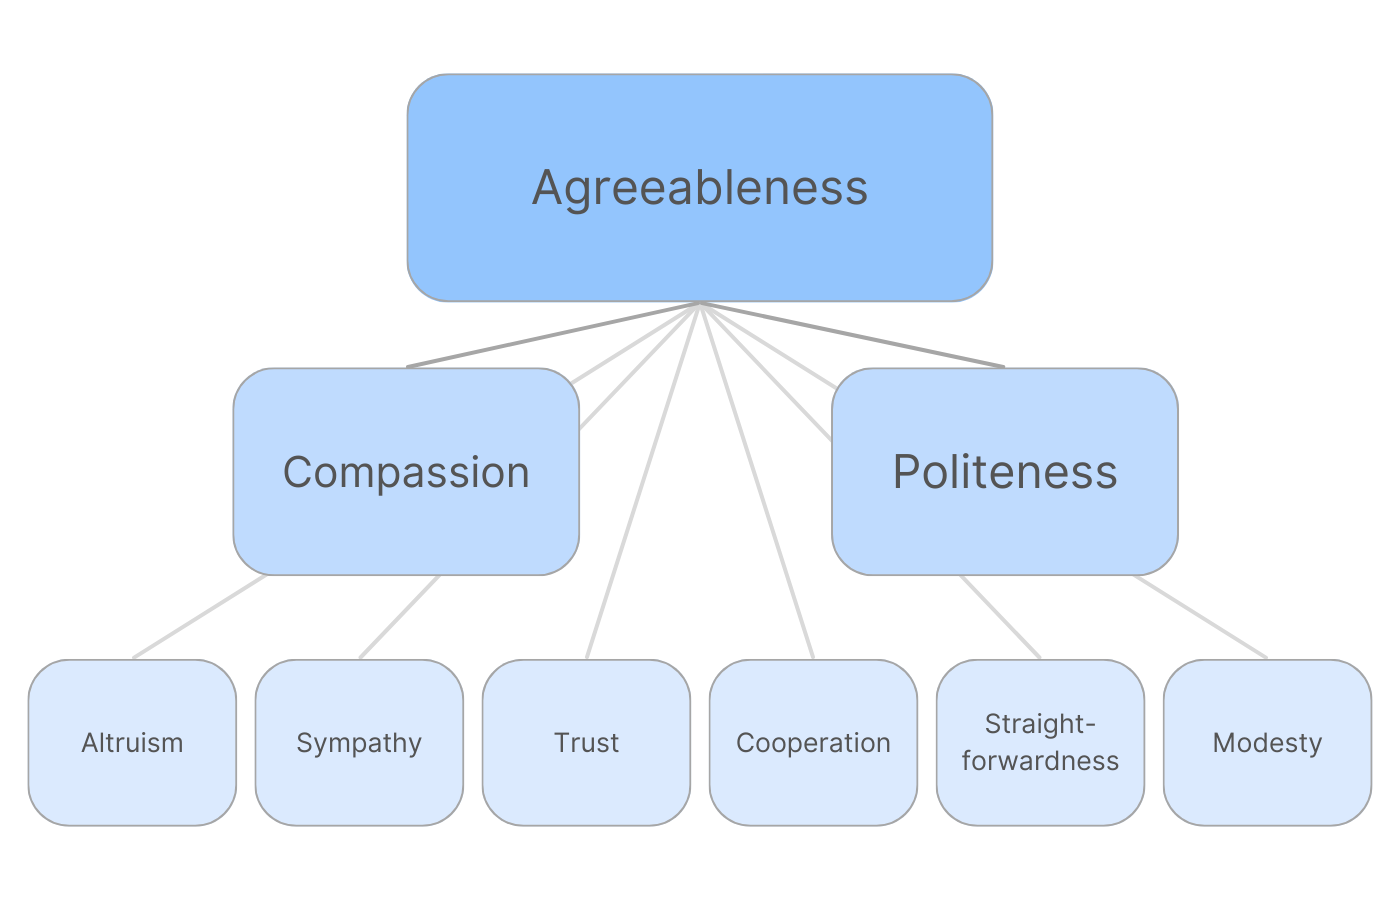 The Agreeableness dimension and its aspects and facets